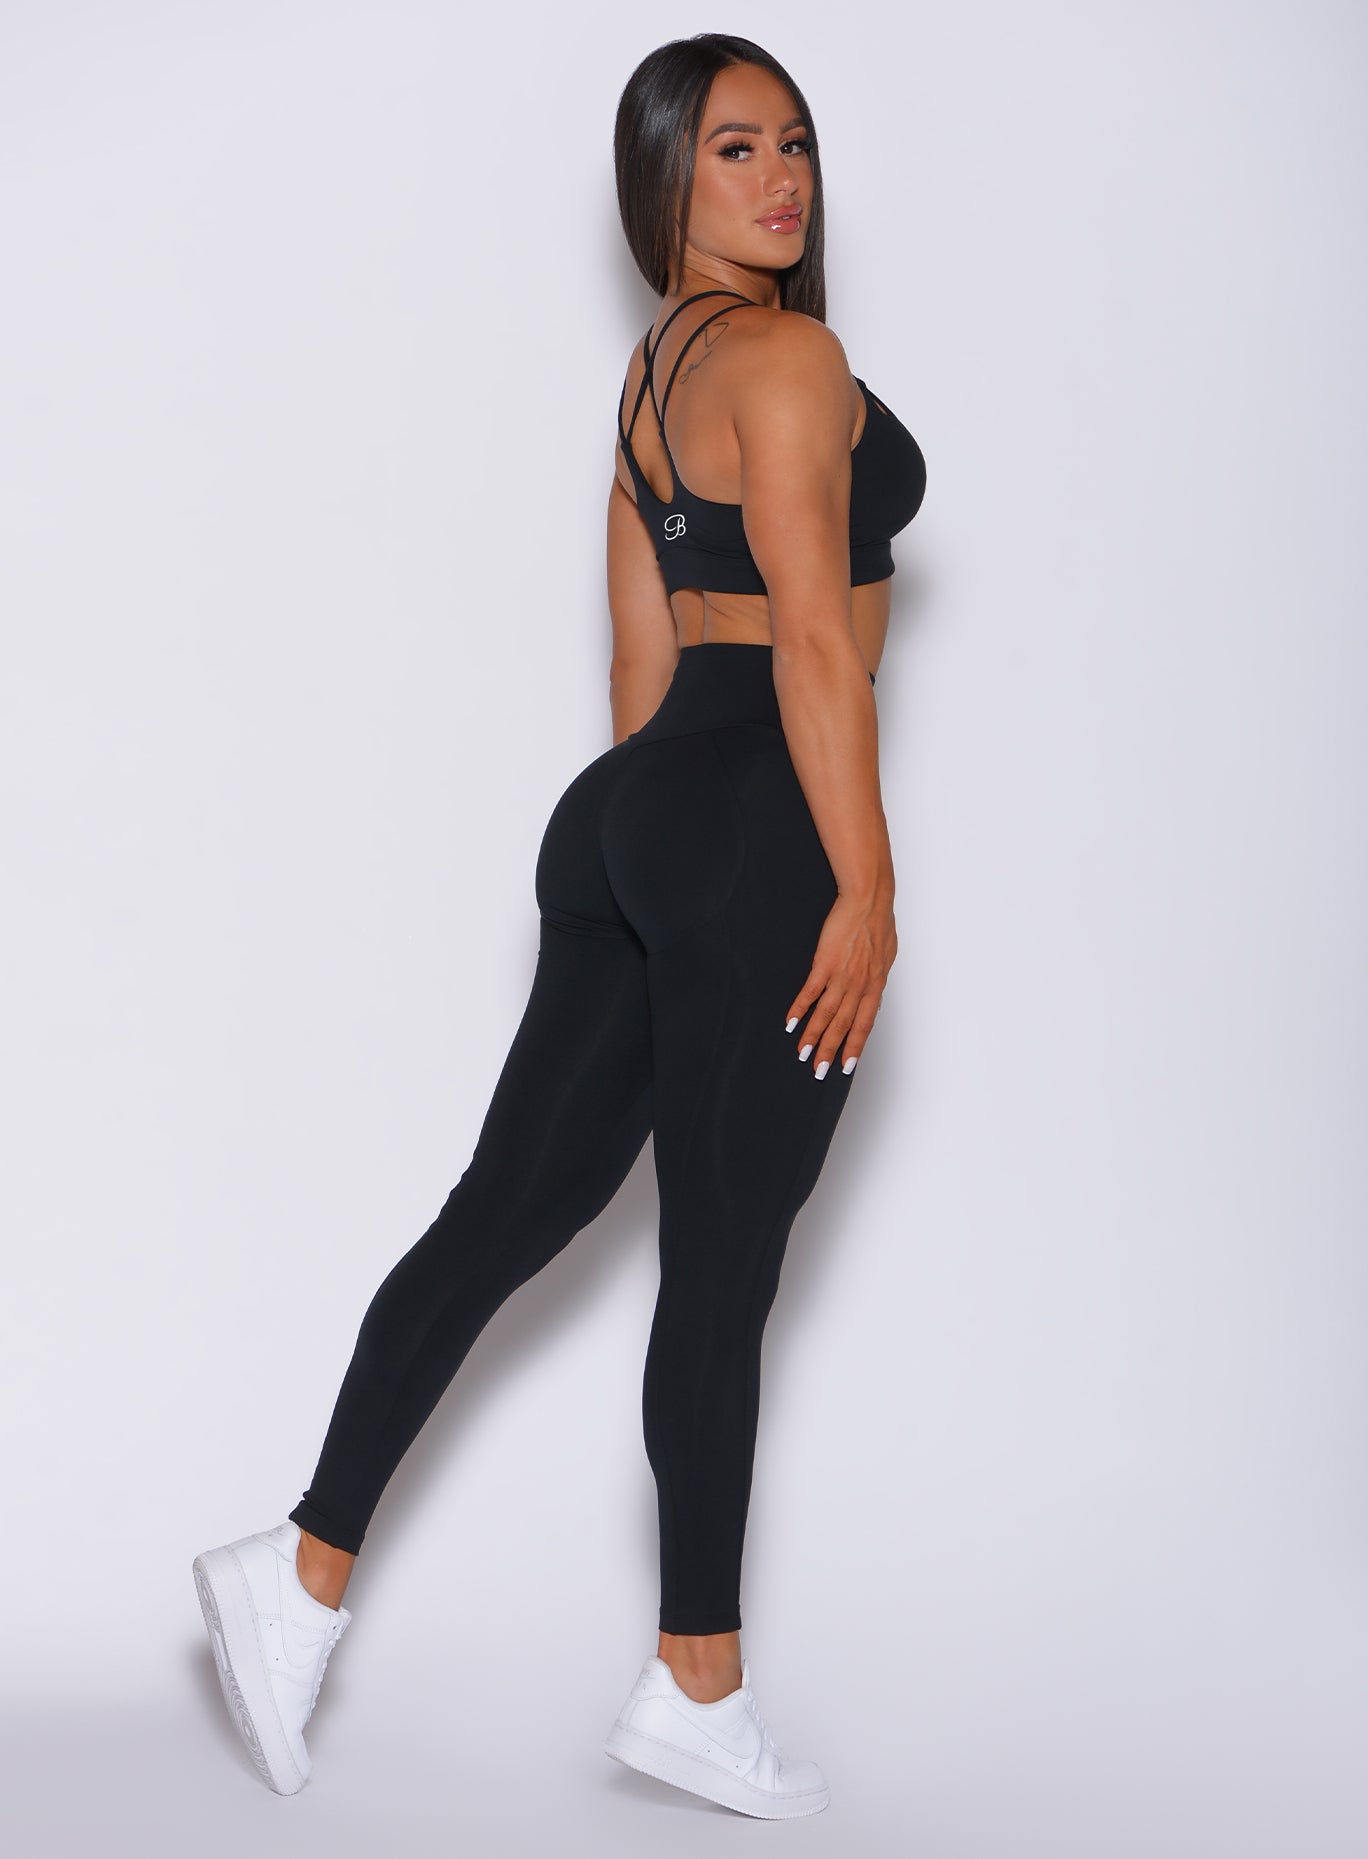 Right side profile view of a model in our new and enhanced black shape leggings and a matching bra